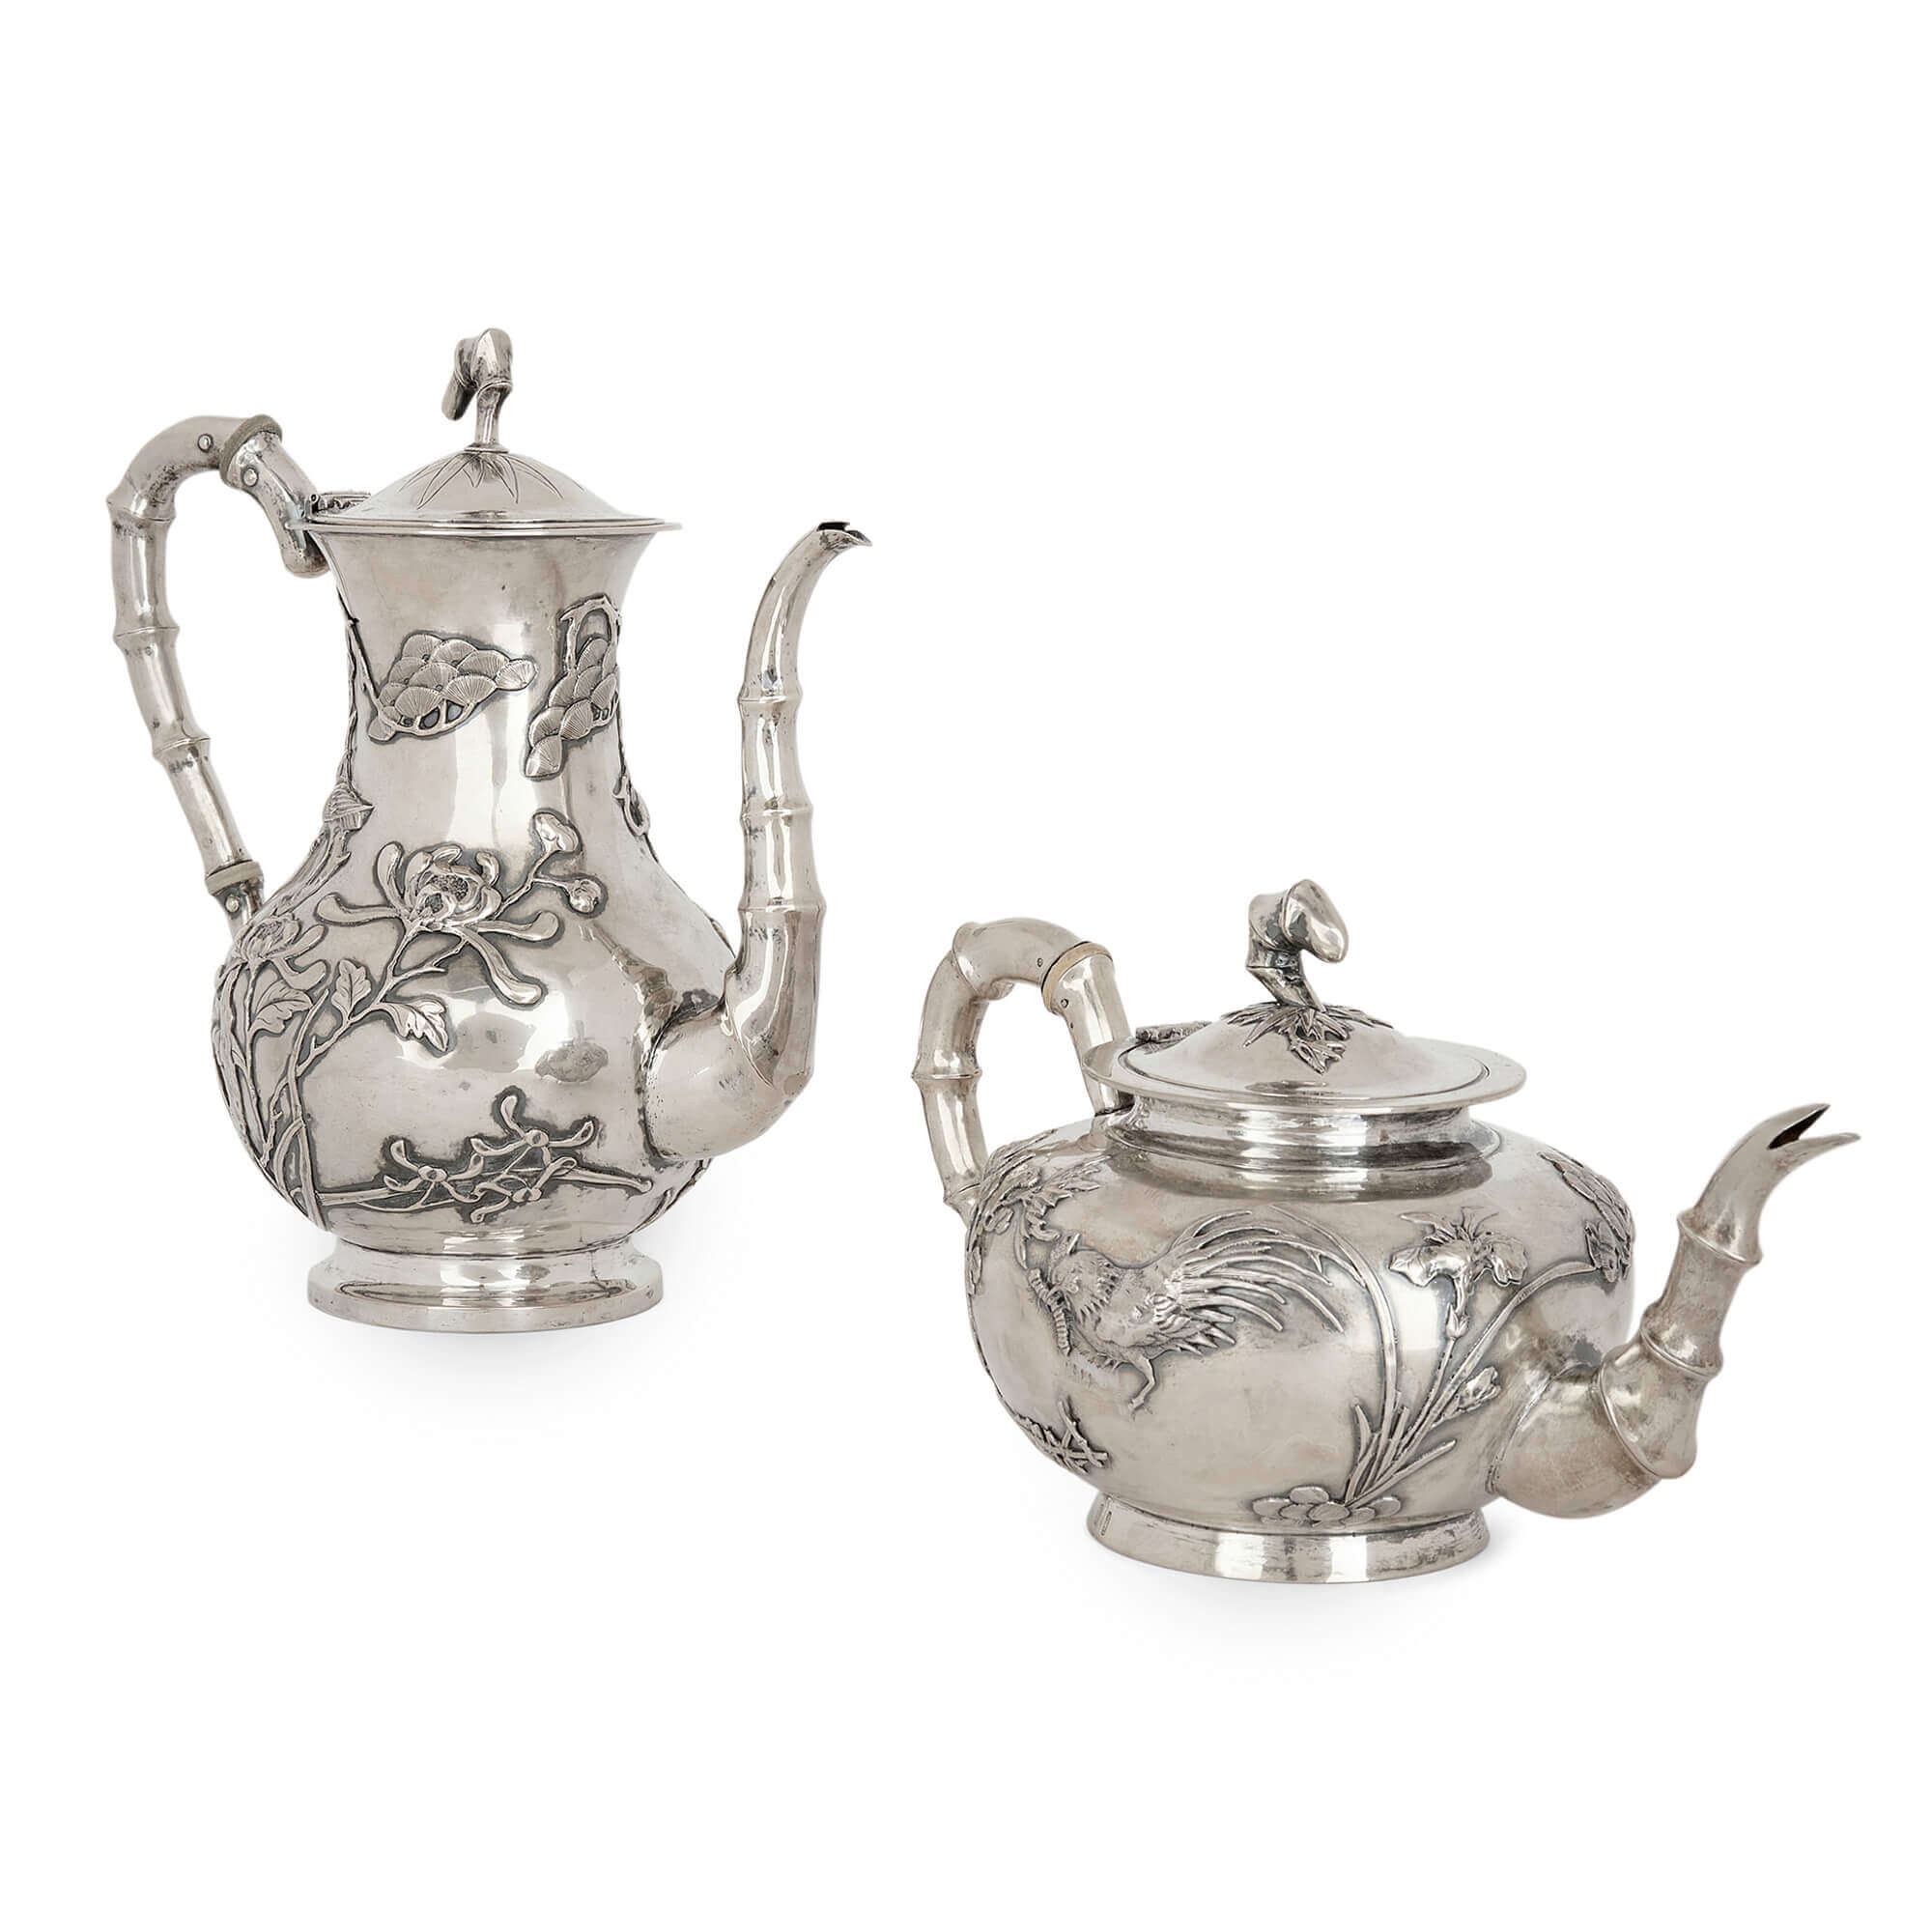 https://www.mayfairgallery.com/media/catalog/product/1/6/16955-chinese-export-silver-tea-coffee-service-tuck-chang-co-2-2000x.jpg